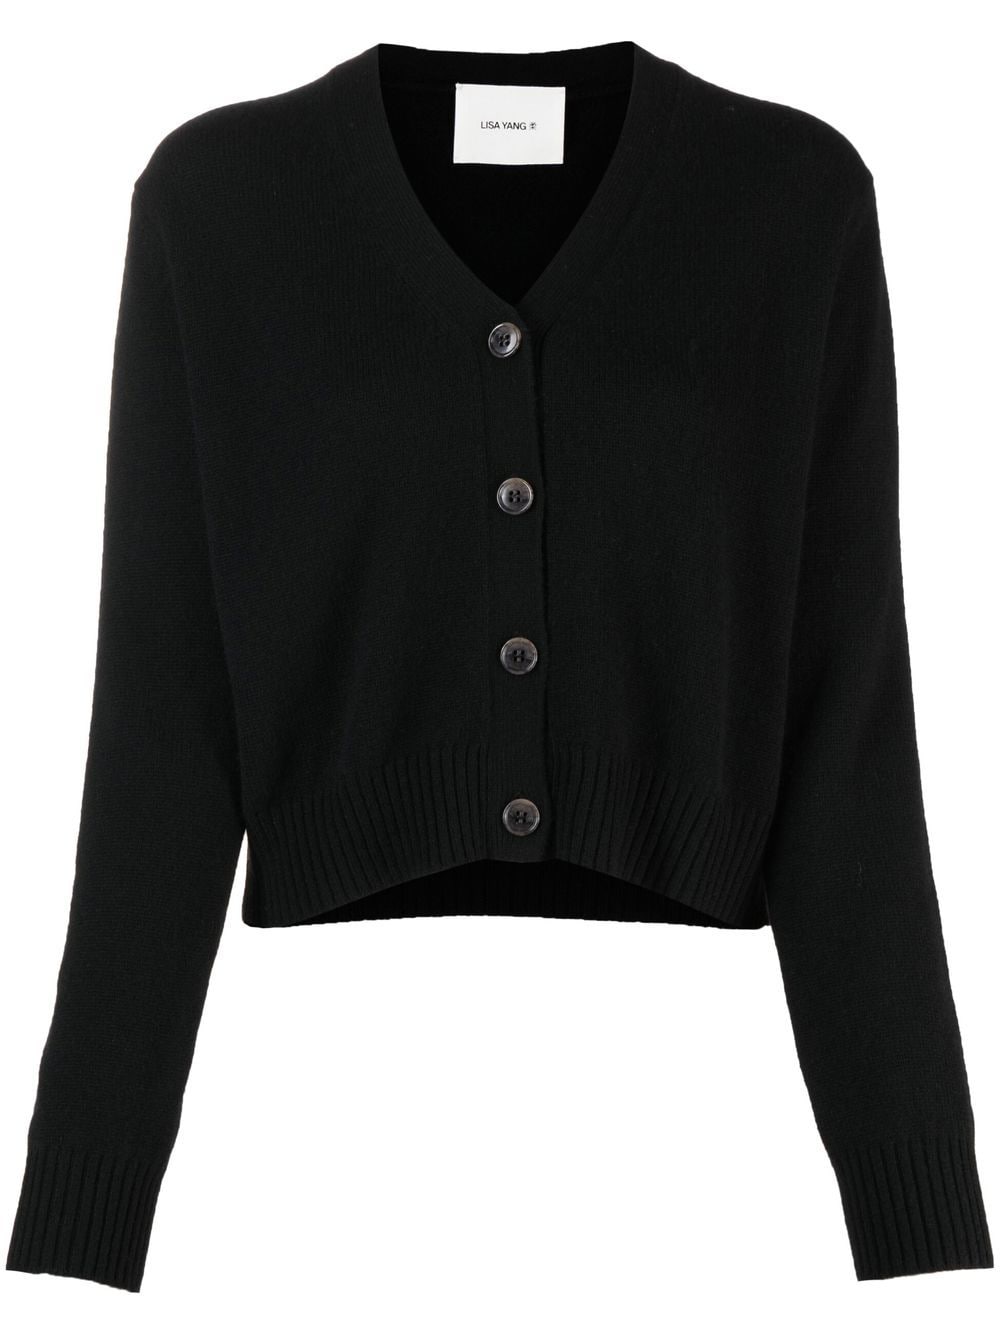 Image 1 of Lisa Yang buttoned cashmere cardigan